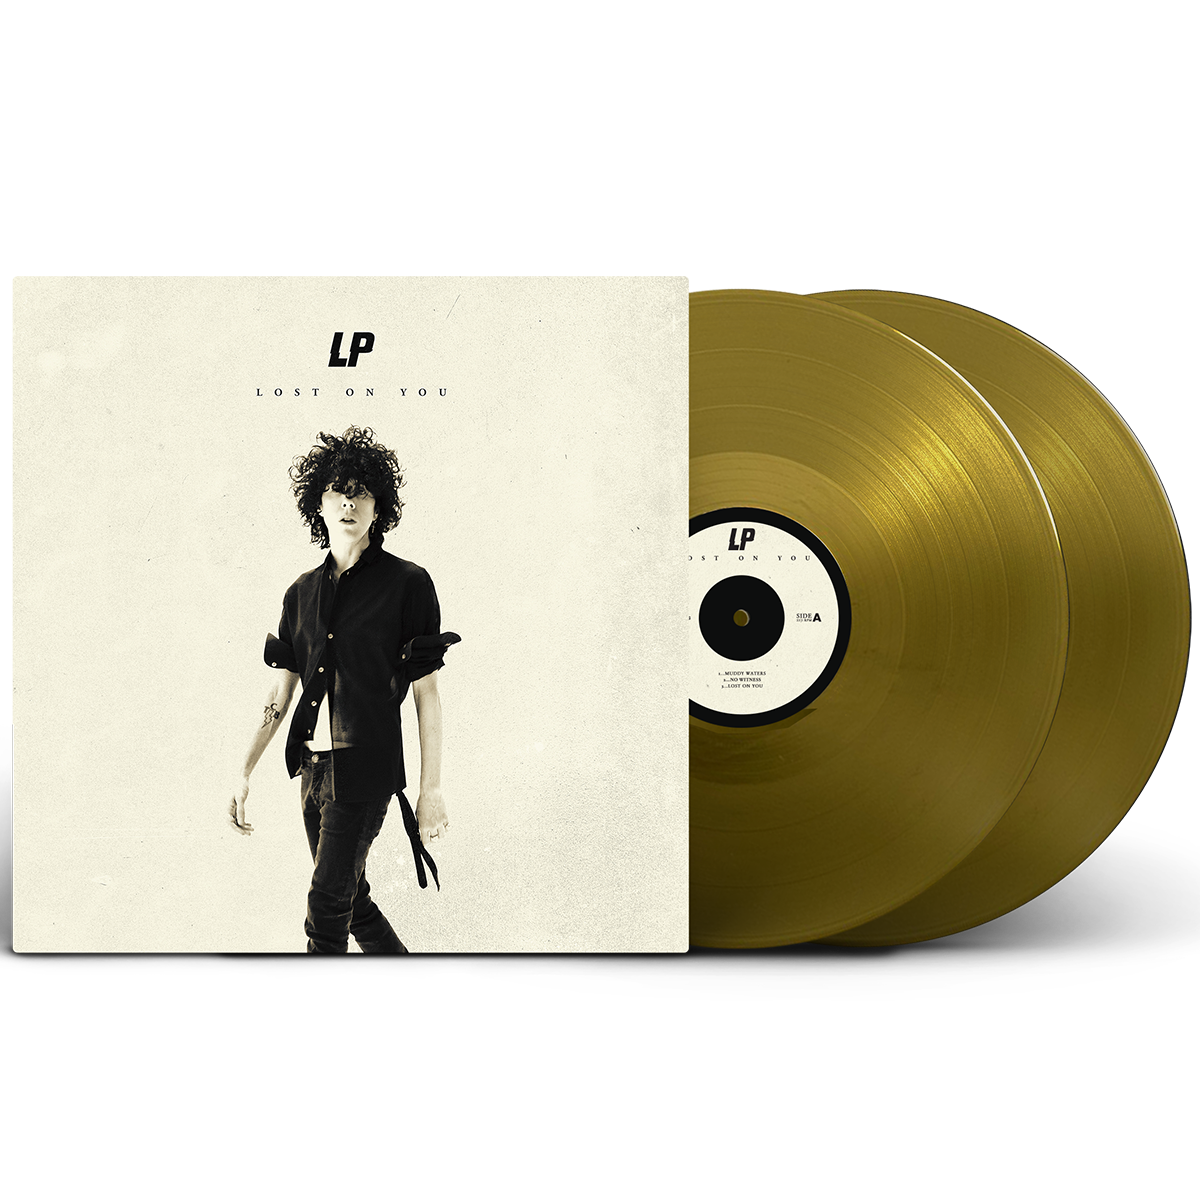 Lost On You 2 LP (Opaque Gold)